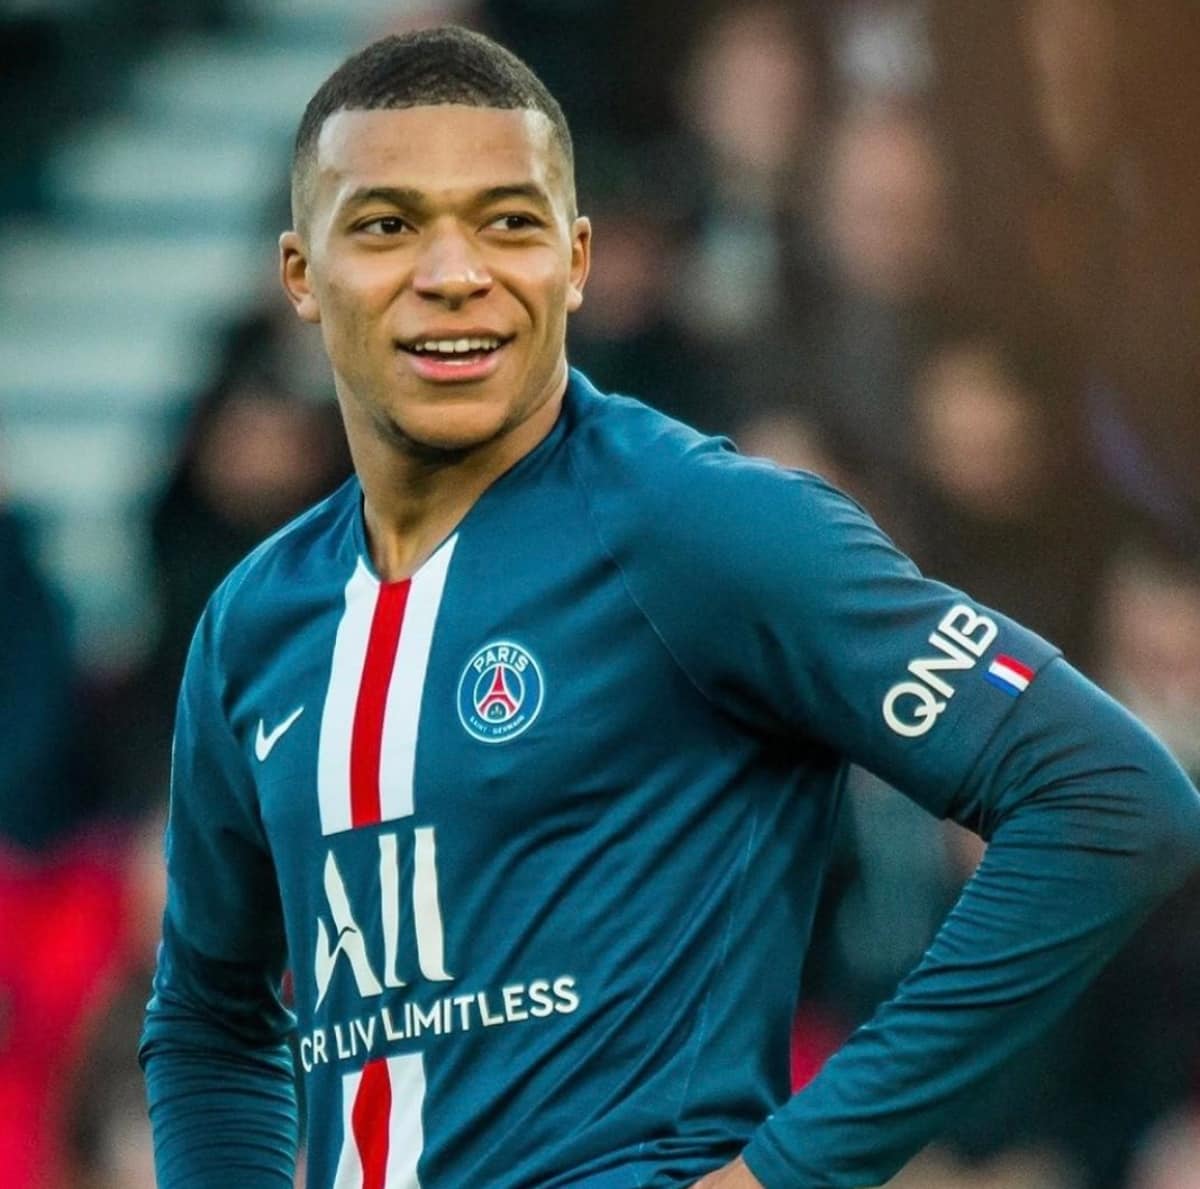 Kylian Mbappe's Transfer To Real Madrid To Be Announced